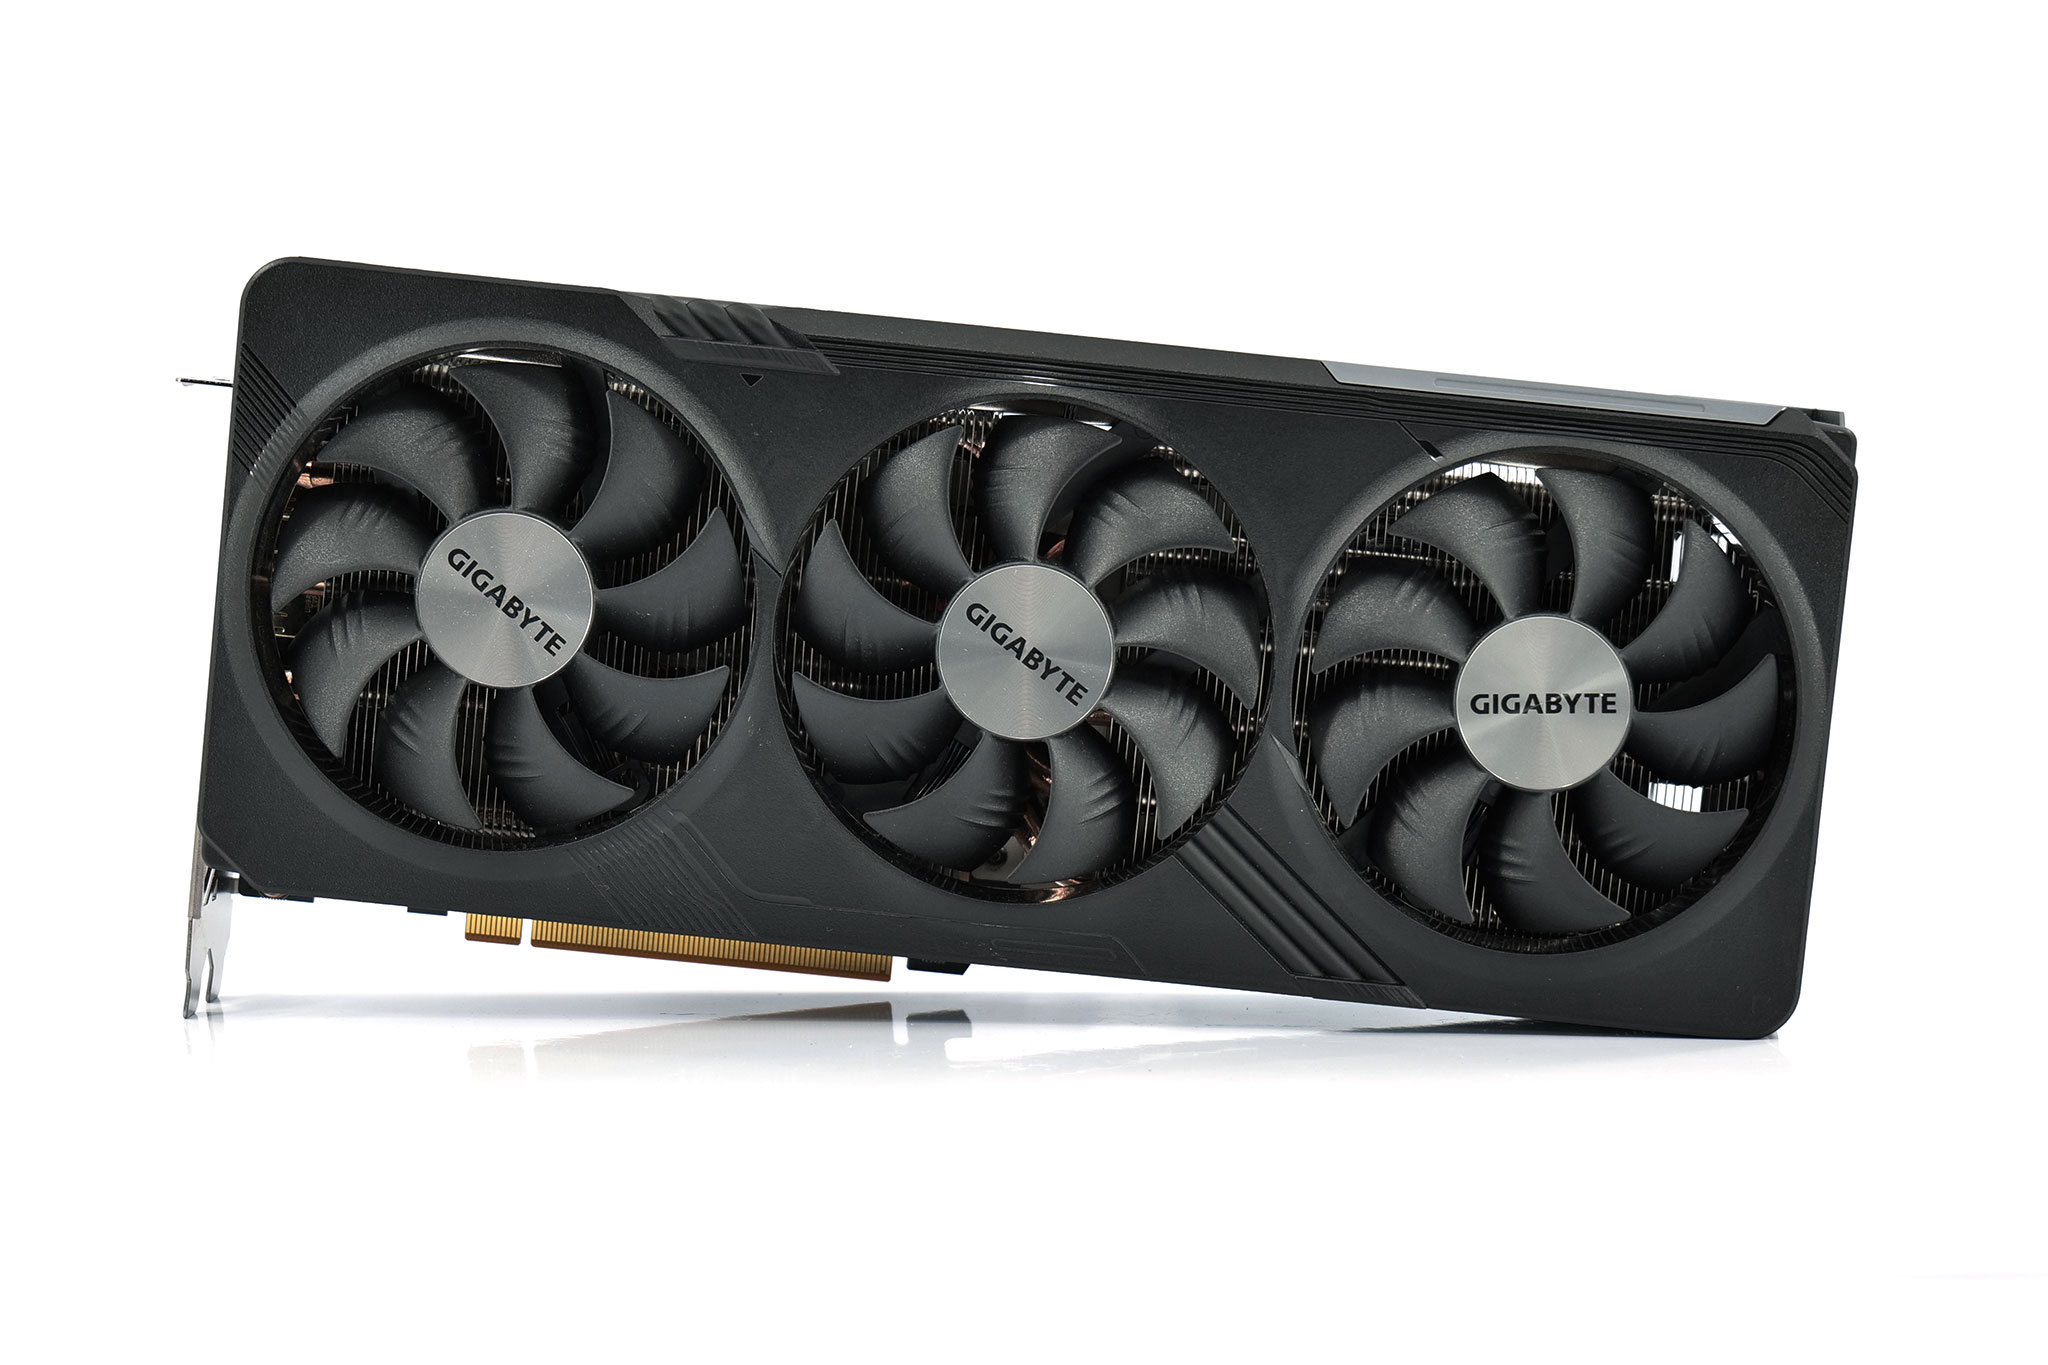 Gigabyte Radeon RX 7700 XT Gaming OC review: great performance for